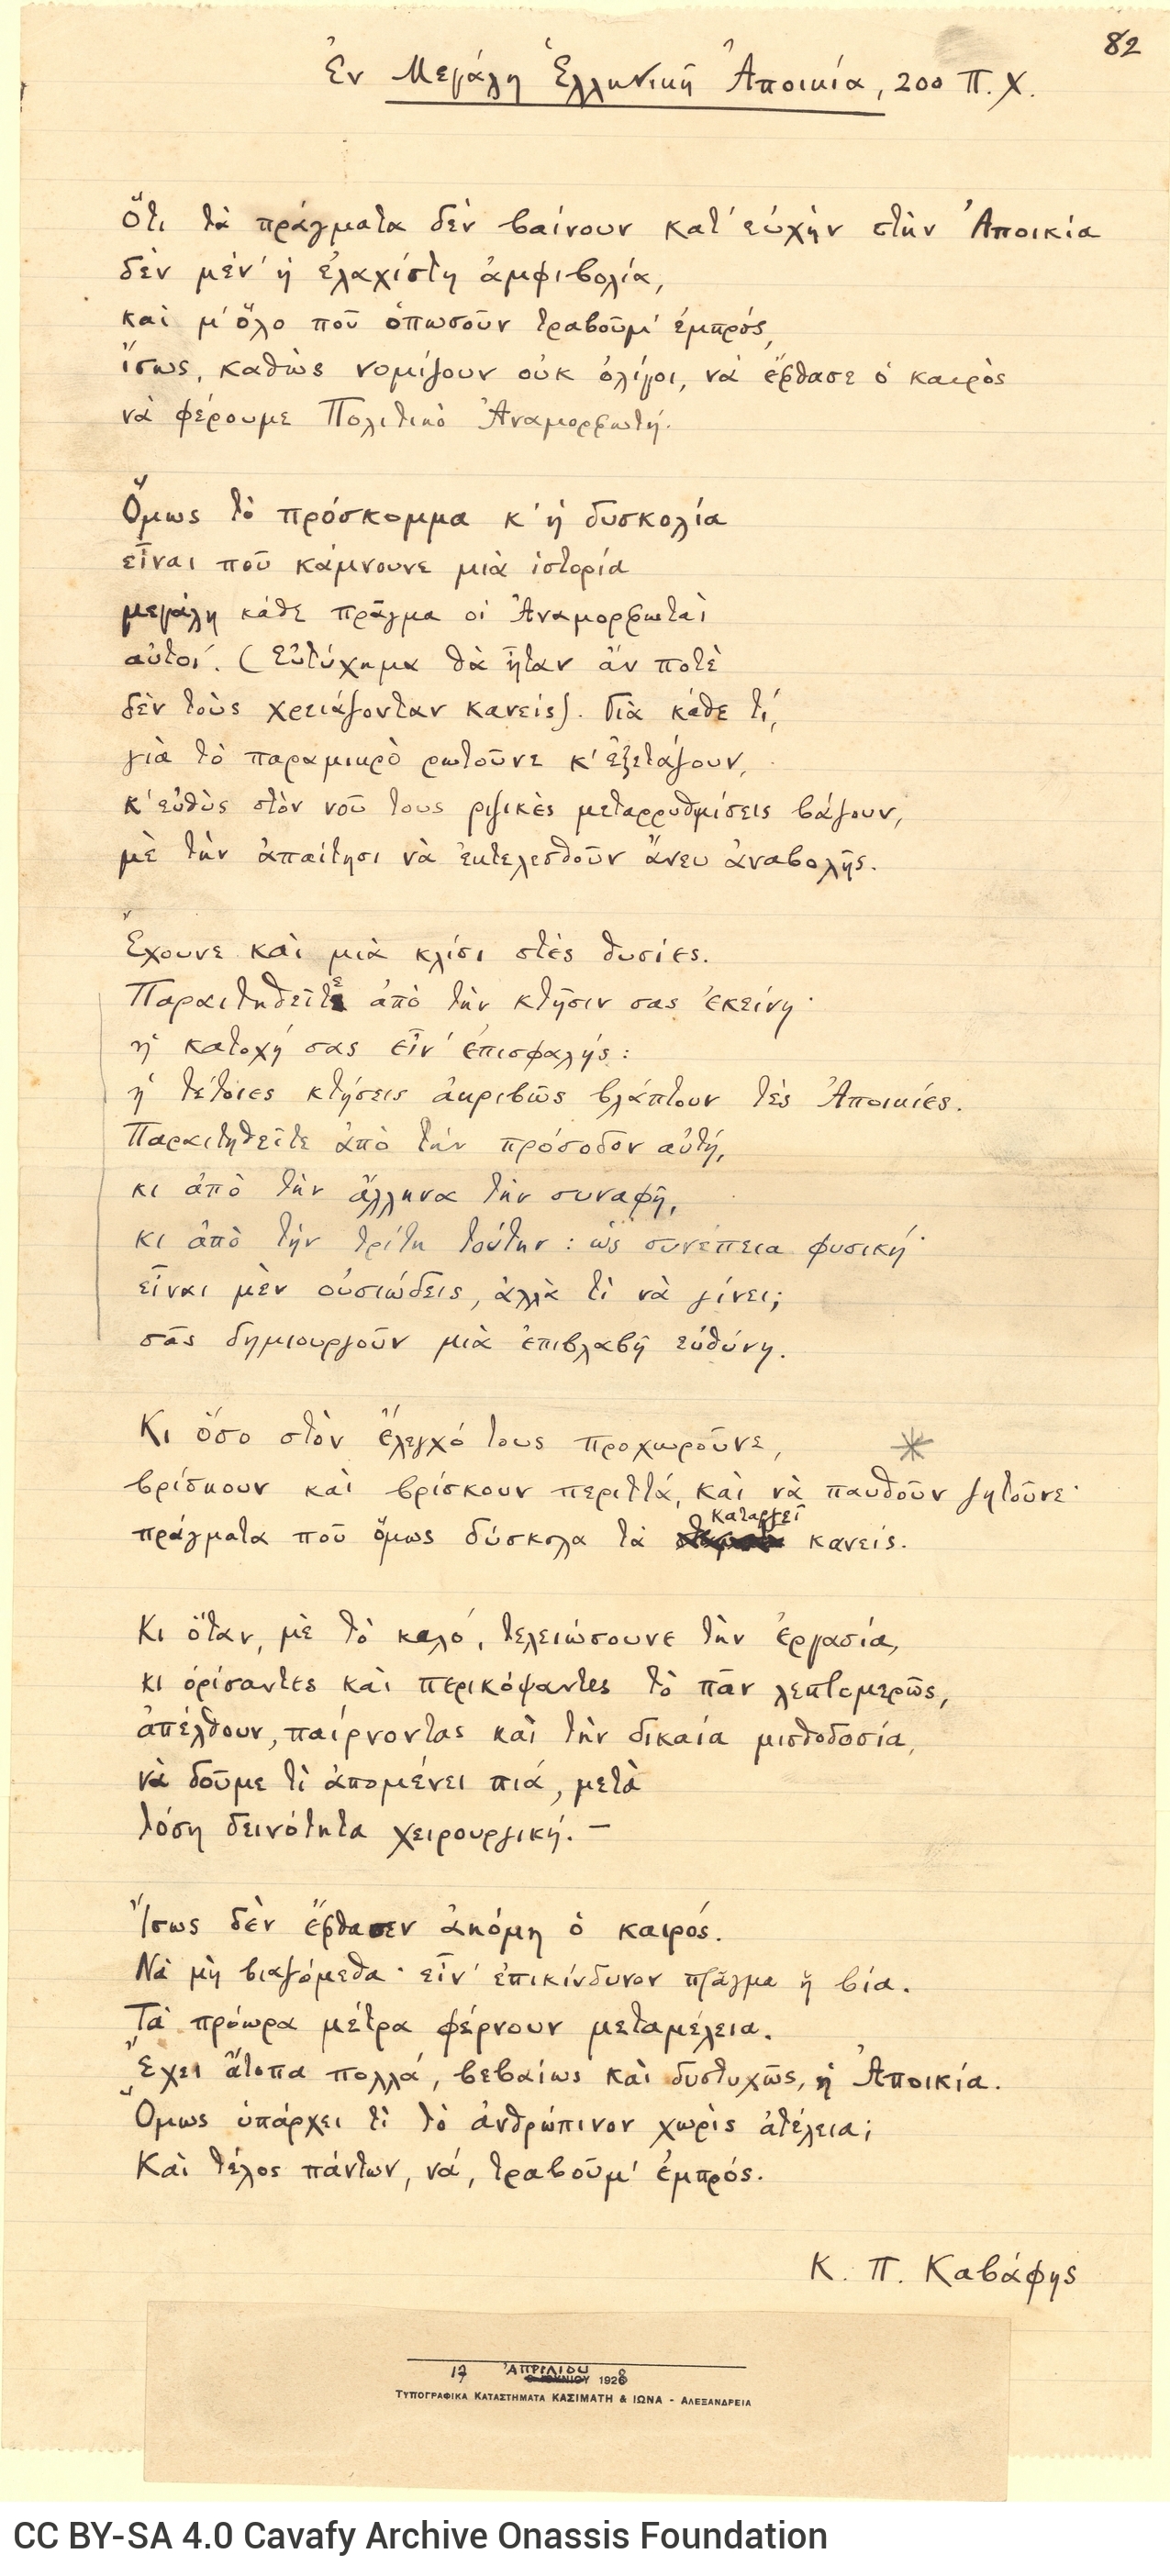 Autograph manuscript of the poem "In a Large Greek Colony, 200 B.C." in a sheet consisting of two pieces put together. Can